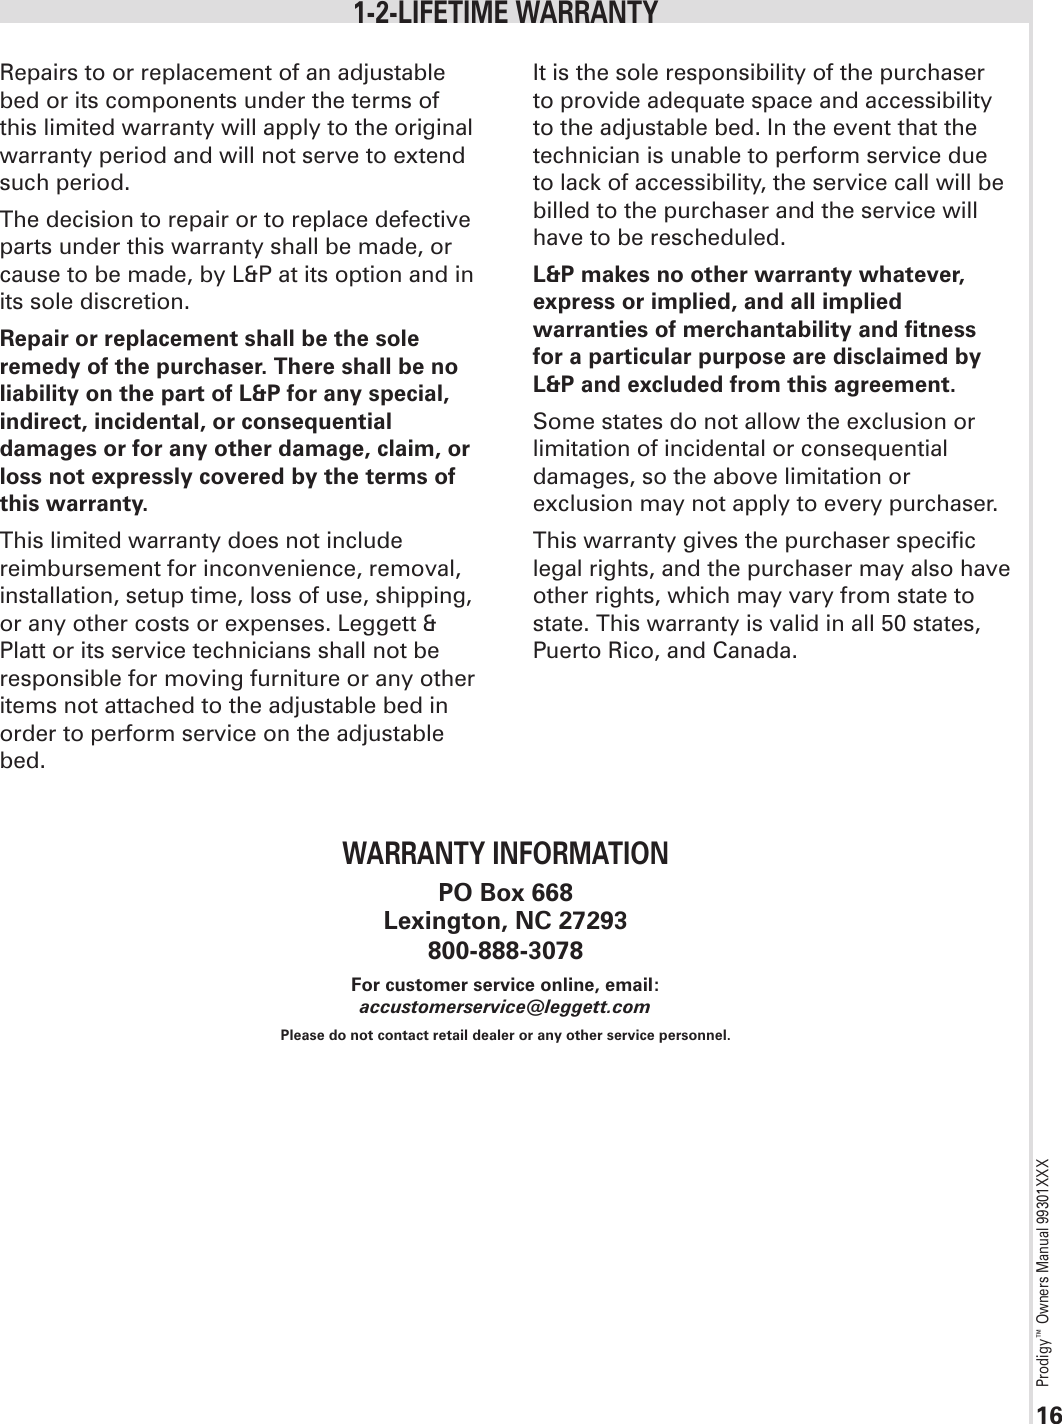 Prodigy™ Owners Manual 99301XXX16Repairs to or replacement of an adjustable bed or its components under the terms of this limited warranty will apply to the original warranty period and will not serve to extend such period.The decision to repair or to replace defective parts under this warranty shall be made, or cause to be made, by L&amp;P at its option and in its sole discretion.Repair or replacement shall be the sole remedy of the purchaser. There shall be no liability on the part of L&amp;P for any special, indirect, incidental, or consequential damages or for any other damage, claim, or loss not expressly covered by the terms of this warranty.This limited warranty does not include reimbursement for inconvenience, removal, installation, setup time, loss of use, shipping, or any other costs or expenses. Leggett &amp; Platt or its service technicians shall not be responsible for moving furniture or any other items not attached to the adjustable bed in order to perform service on the adjustable bed. It is the sole responsibility of the purchaser to provide adequate space and accessibility to the adjustable bed. In the event that the technician is unable to perform service due to lack of accessibility, the service call will be billed to the purchaser and the service will have to be rescheduled.L&amp;P makes no other warranty whatever, express or implied, and all implied warranties of merchantability and fitness for a particular purpose are disclaimed by L&amp;P and excluded from this agreement.Some states do not allow the exclusion or limitation of incidental or consequential damages, so the above limitation or exclusion may not apply to every purchaser.  This warranty gives the purchaser specific legal rights, and the purchaser may also have other rights, which may vary from state to state. This warranty is valid in all 50 states, Puerto Rico, and Canada.1-2-LIFETIME WARRANTYWARRANTY INFORMATIONPO Box 668Lexington, NC 27293800-888-3078For customer service online, email: accustomerservice@leggett.comPlease do not contact retail dealer or any other service personnel.